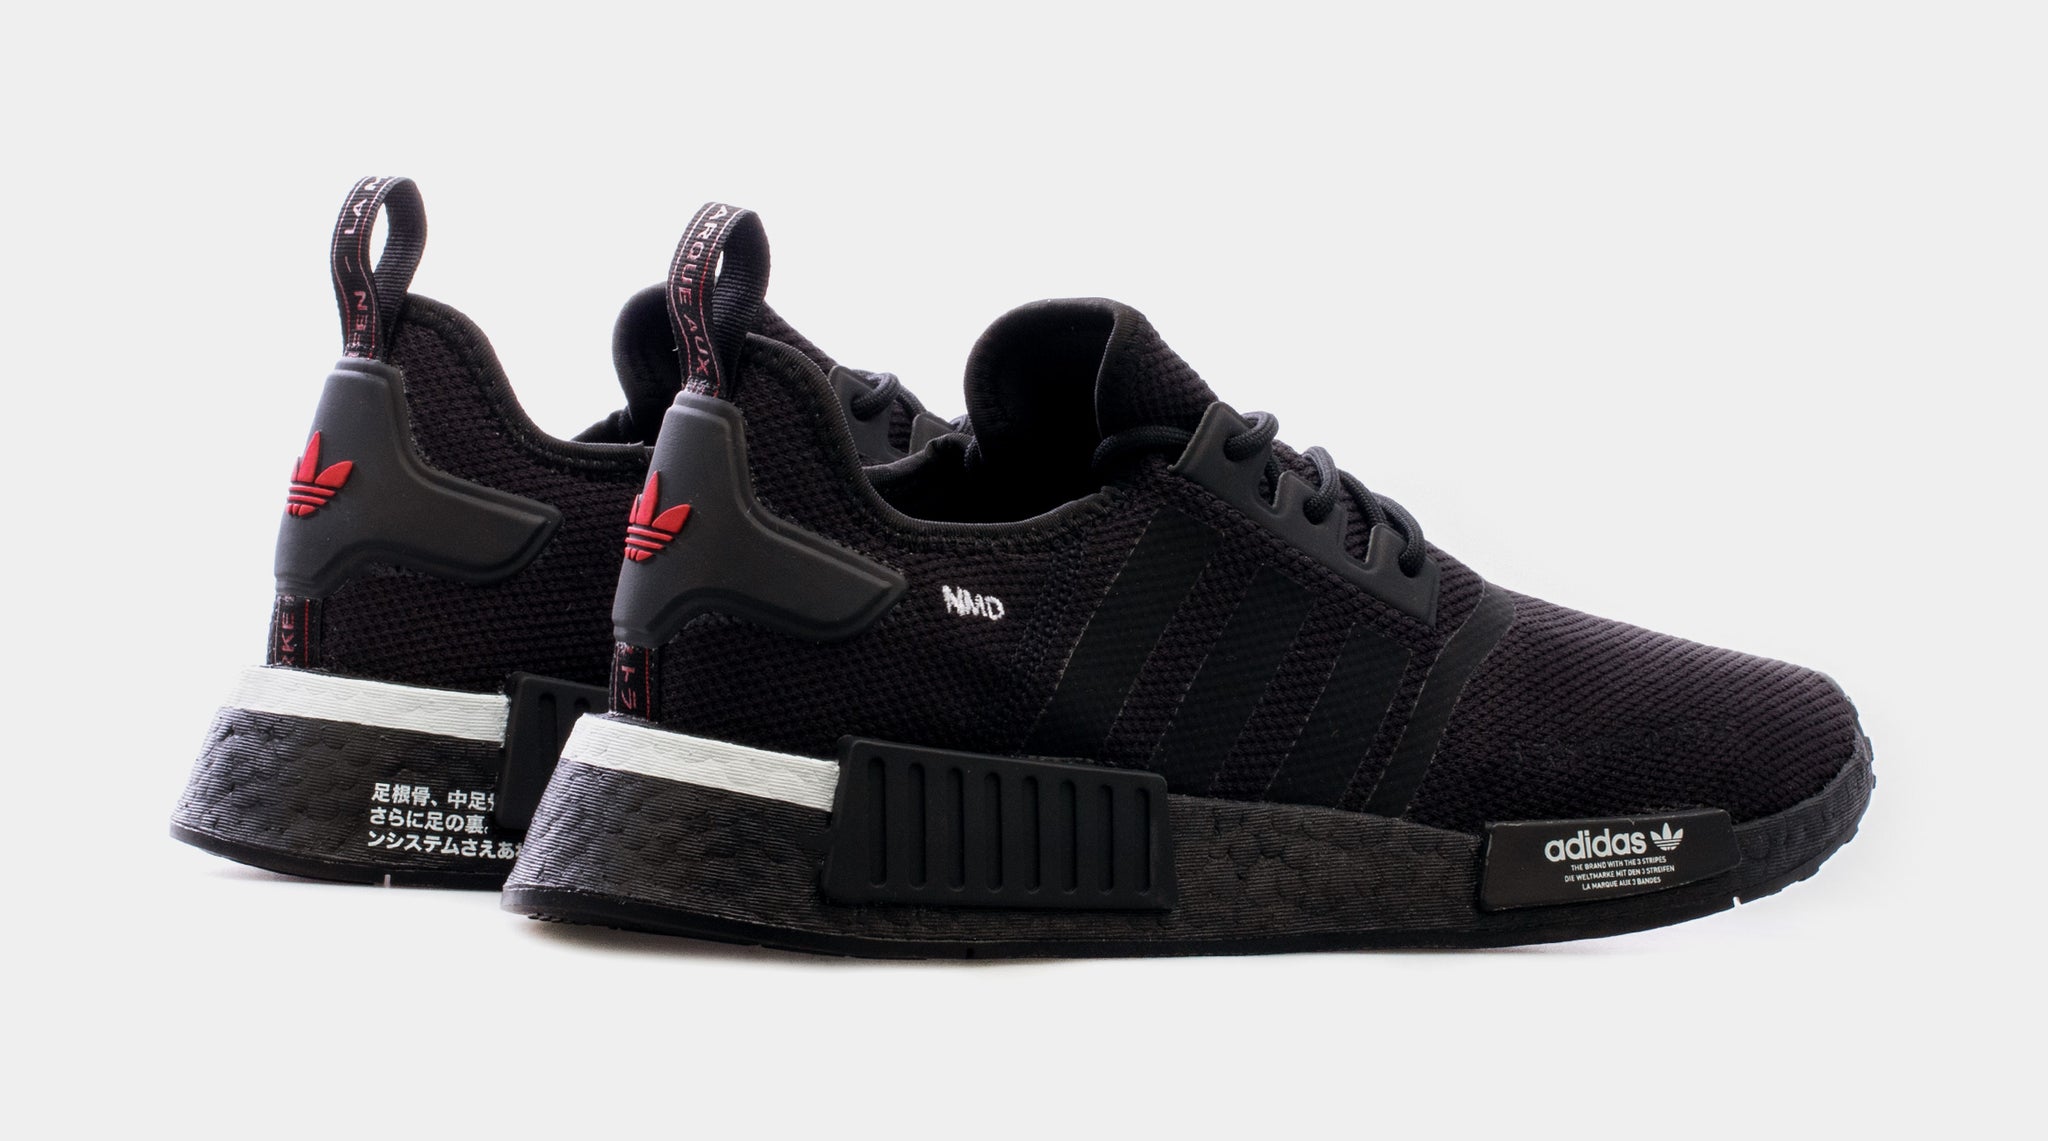 The exclusive @adidas x Shoe Palace NMD R1 SMU available in Men's